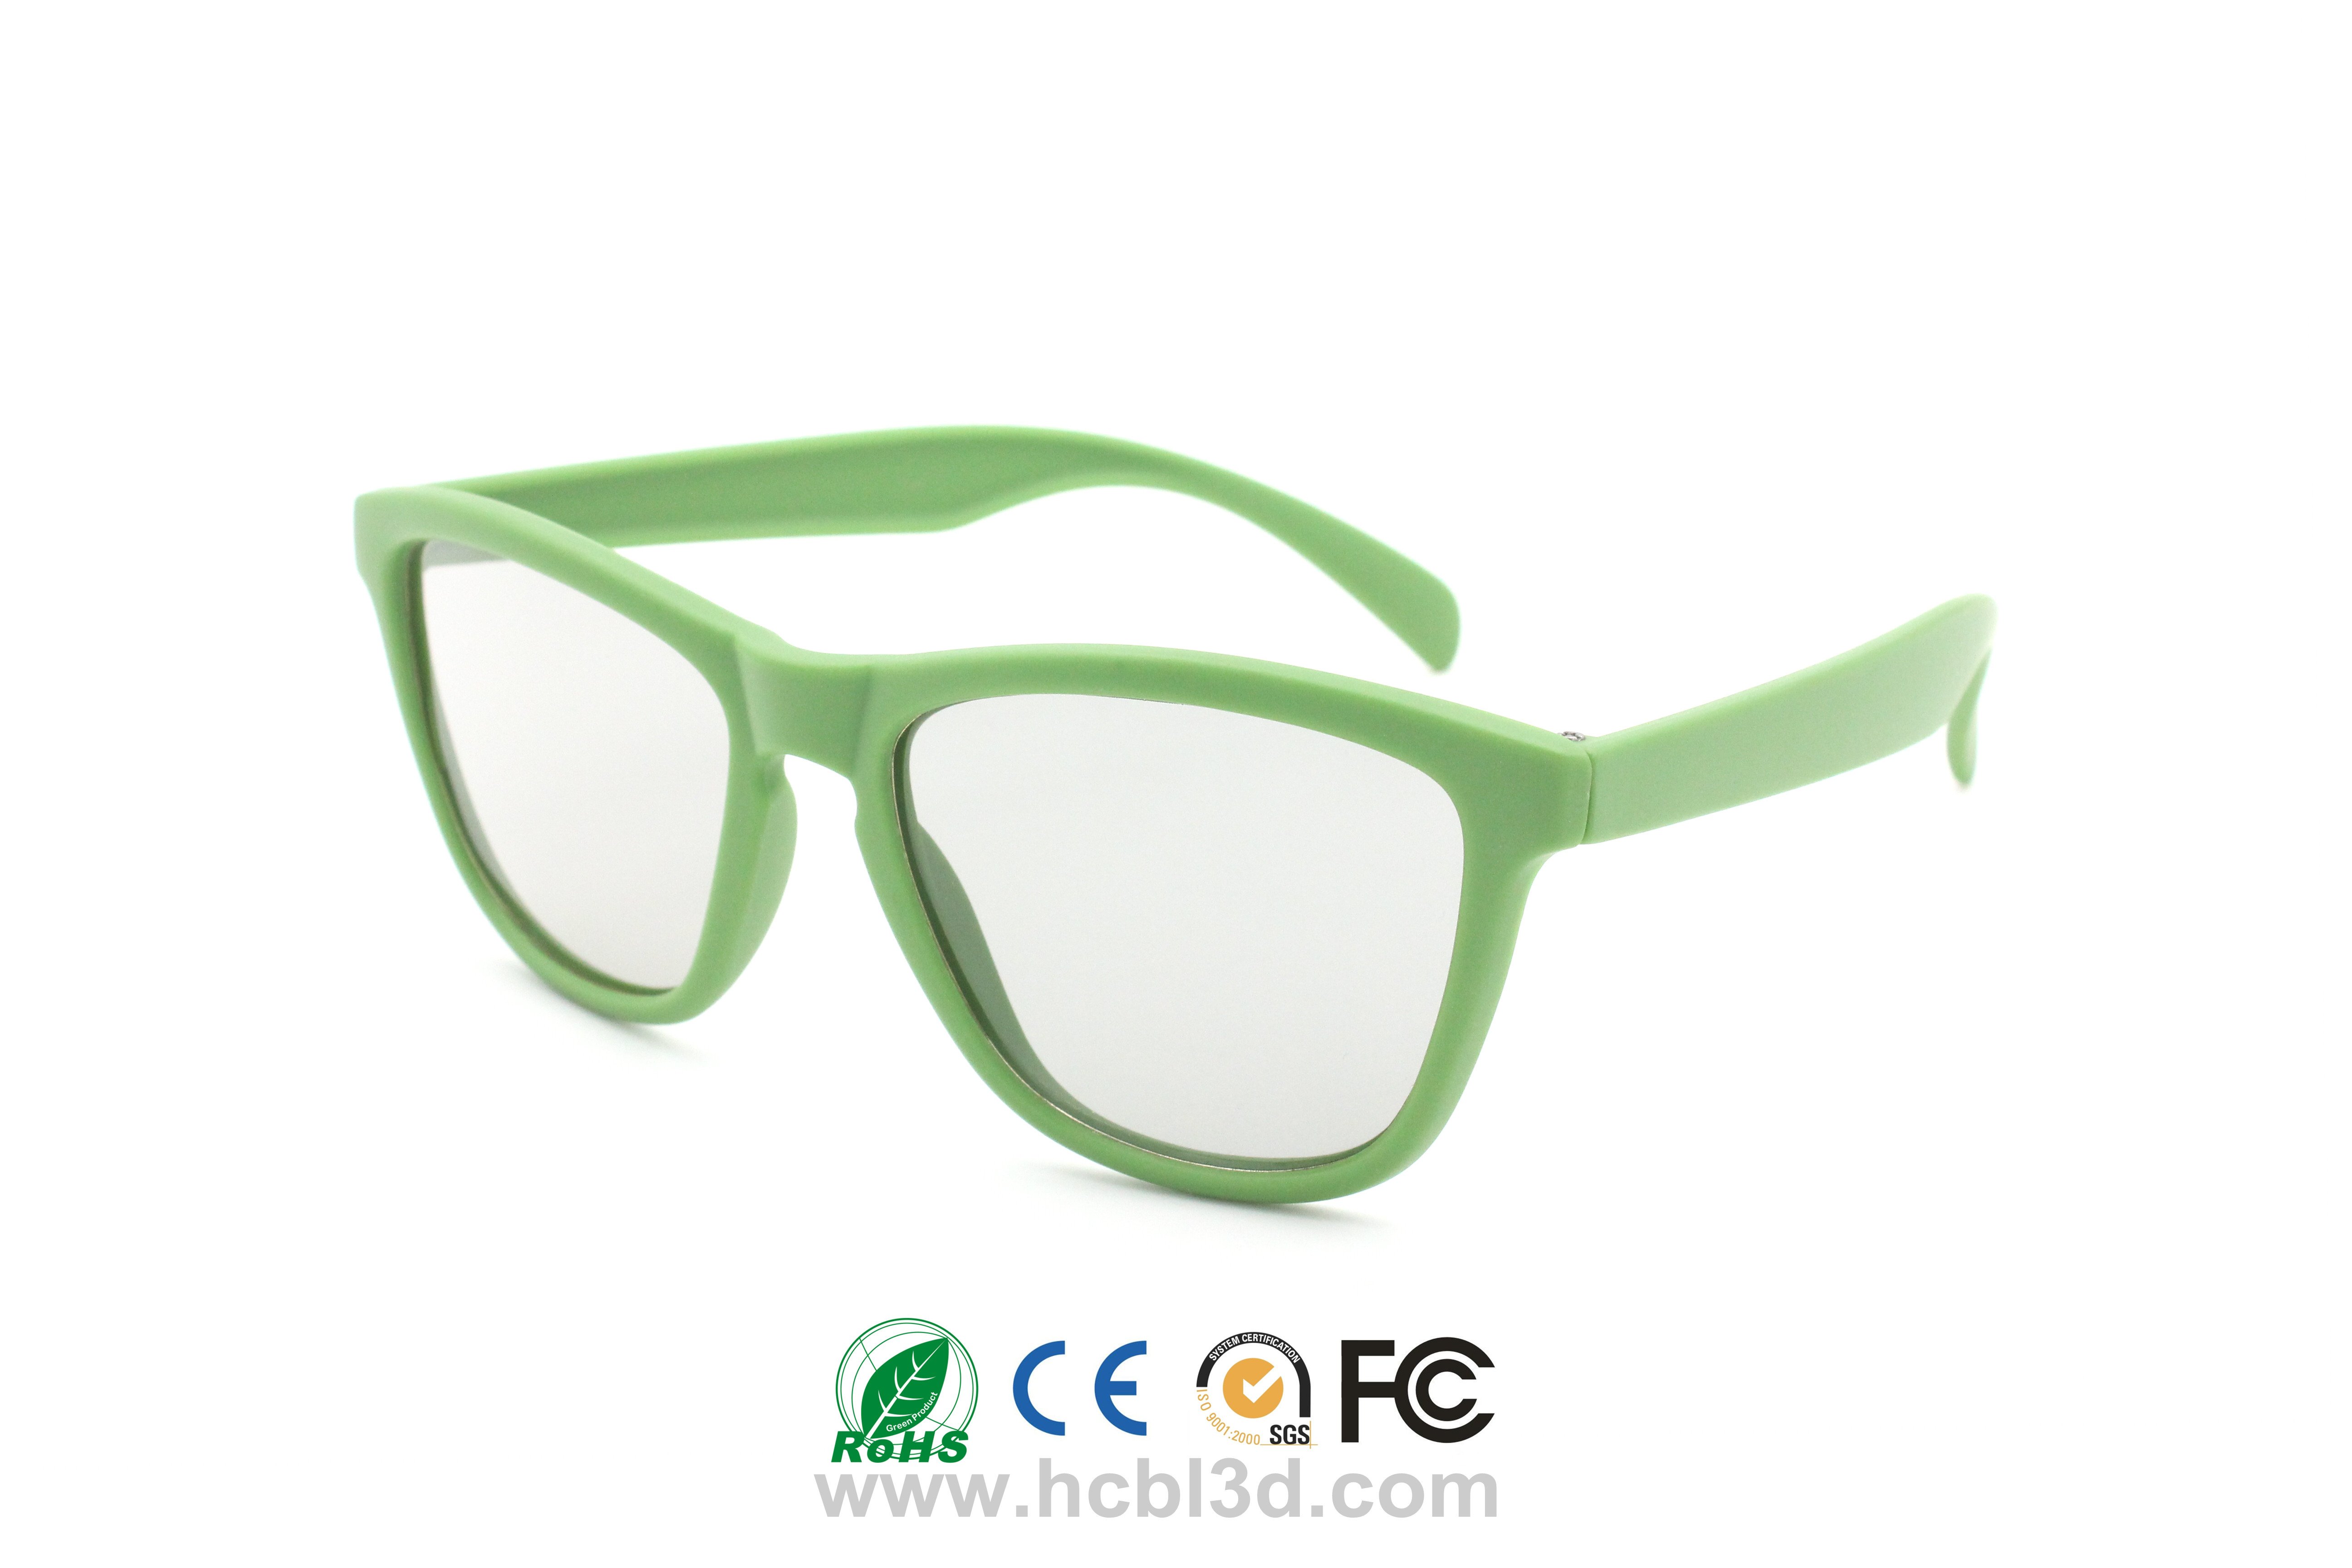 Circular Polarized 3D Glasses Reusable for Theaters in Customized Colors